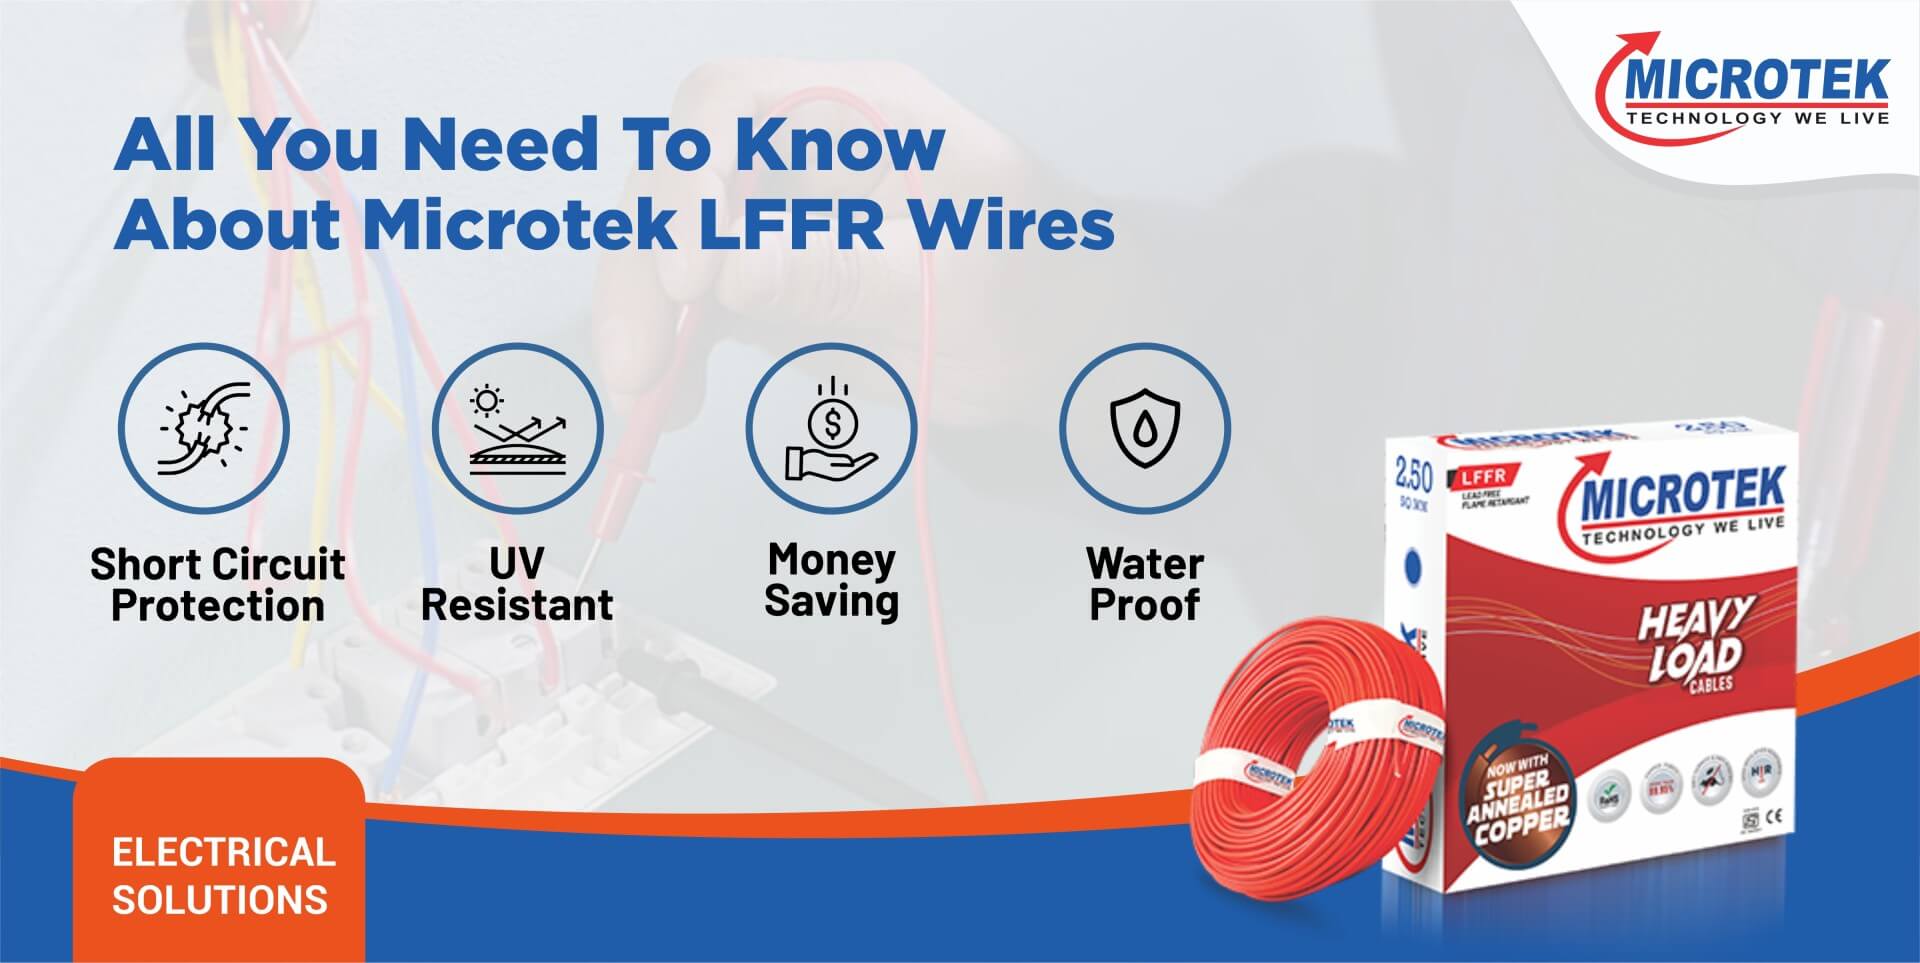 All you need to know about Microtek LFFR Wires